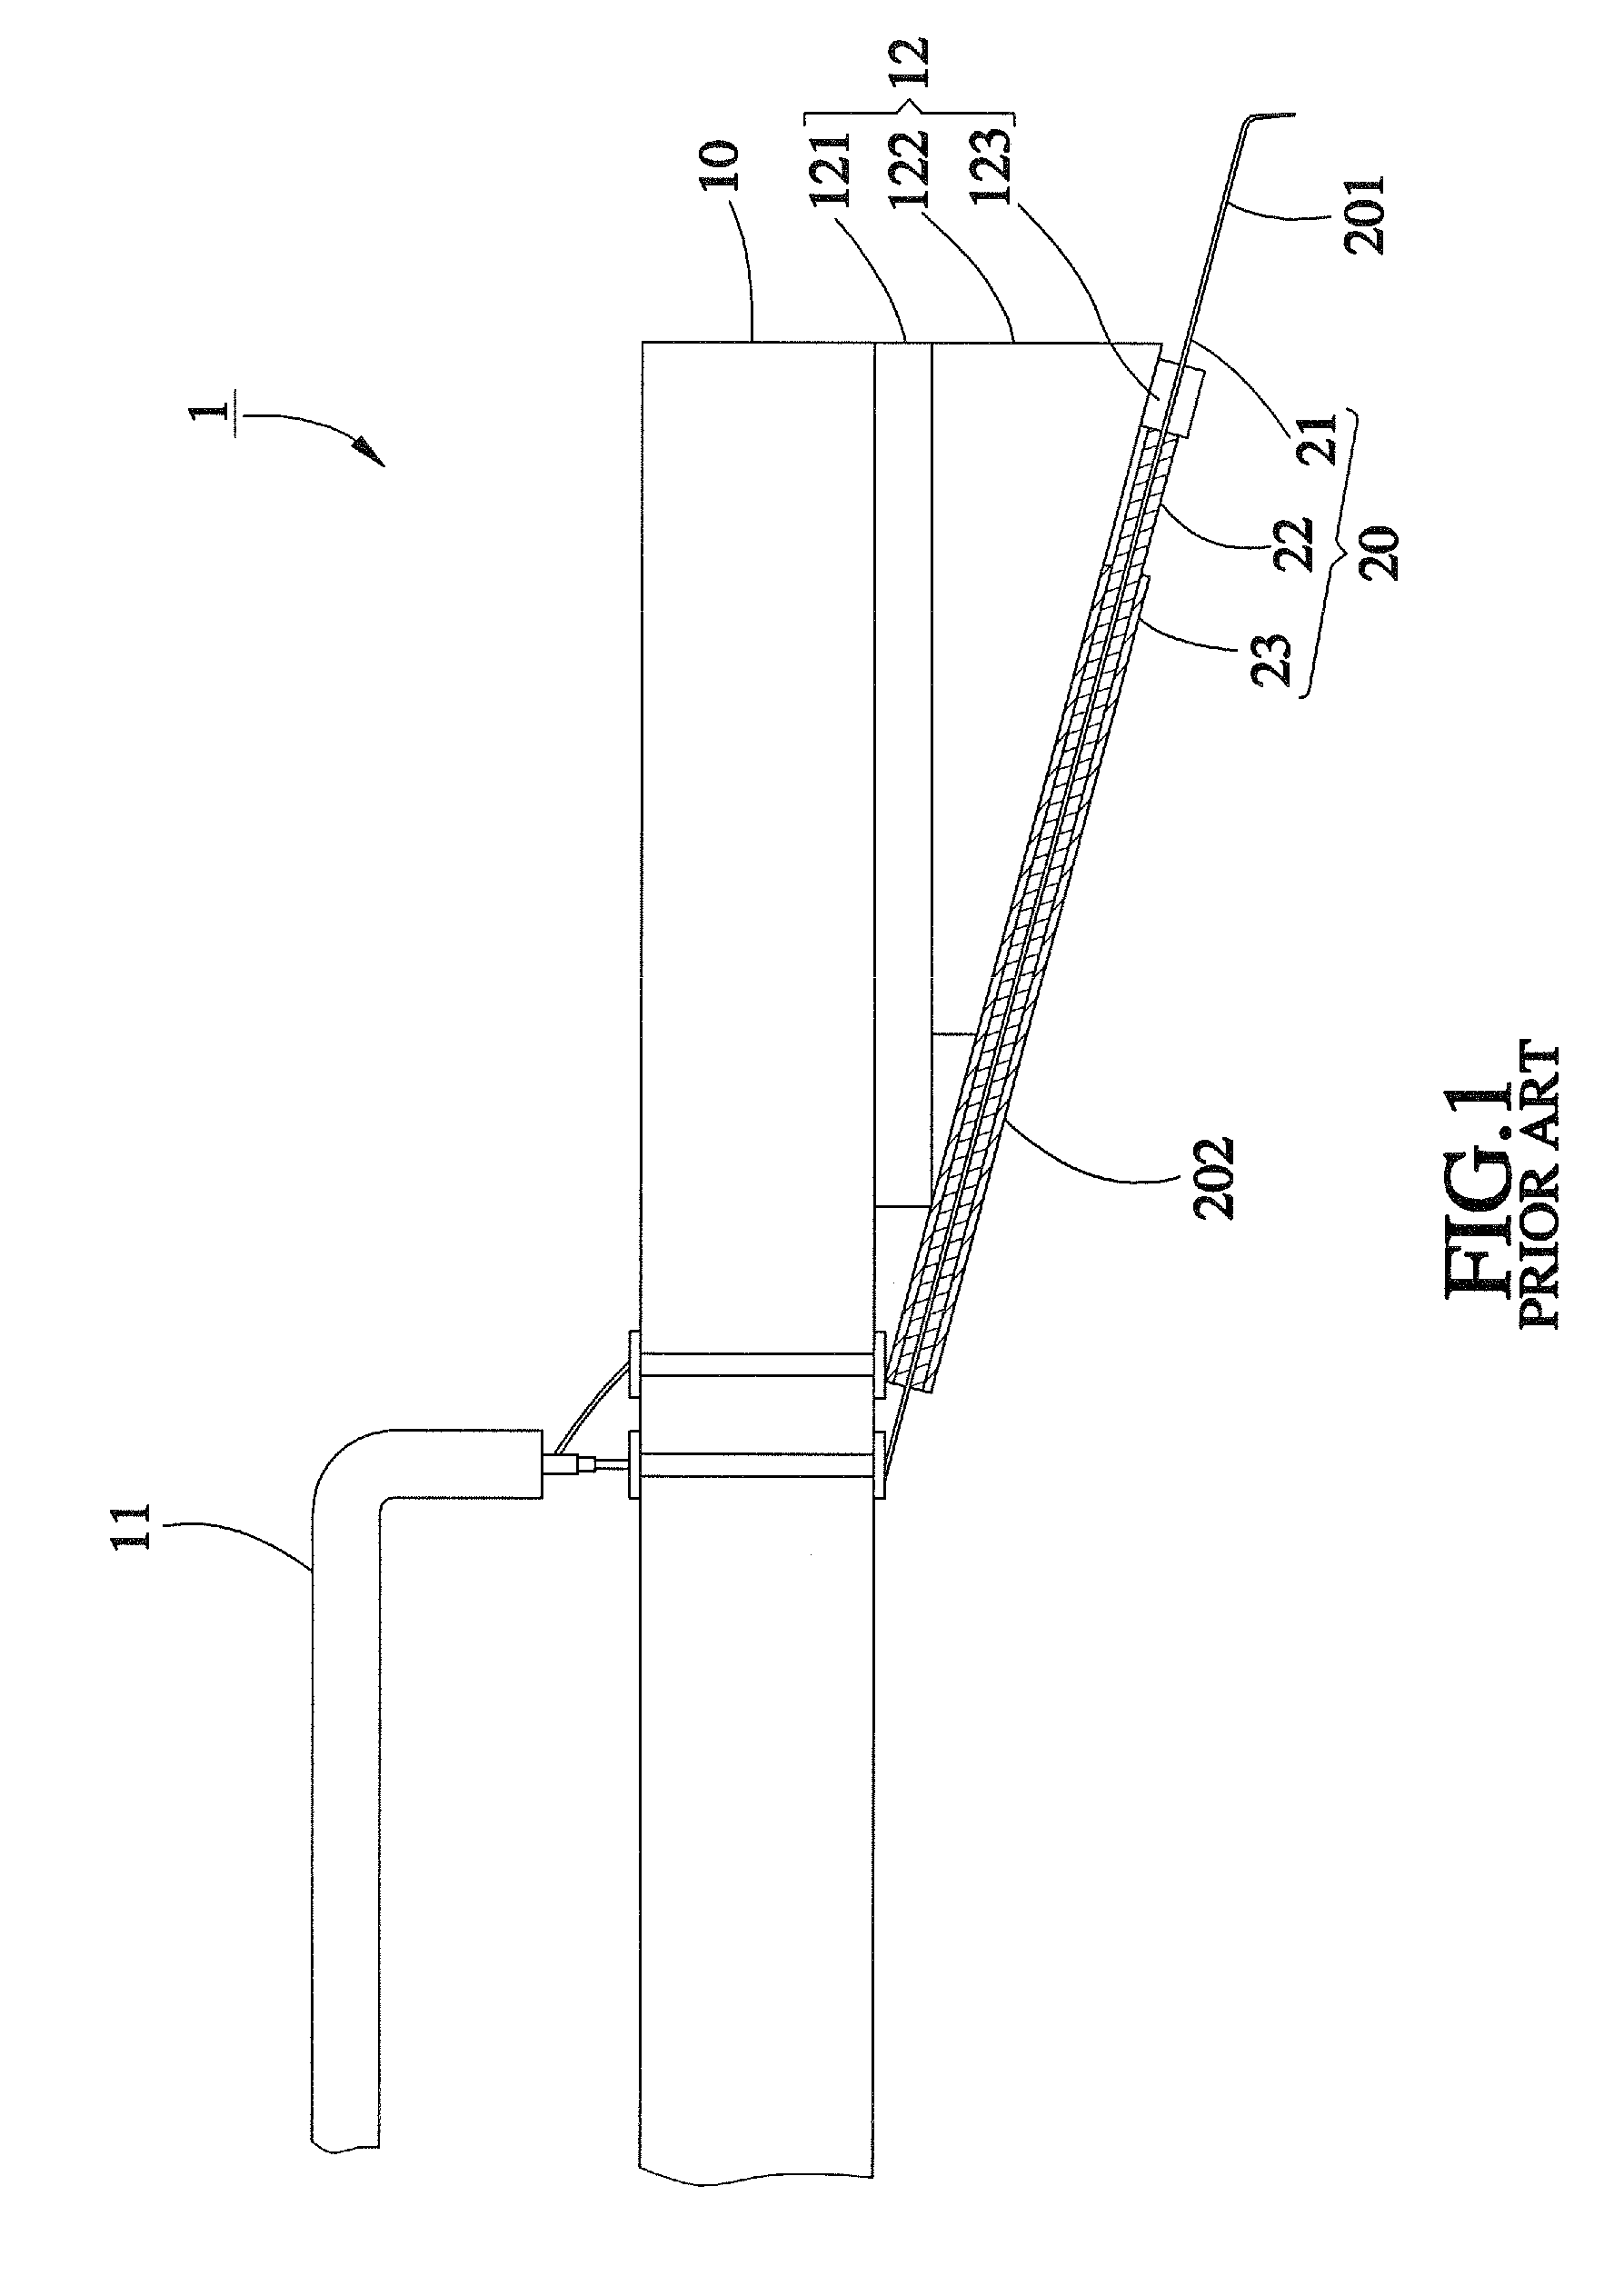 Probe for high frequency signal transmission and probe card using the same